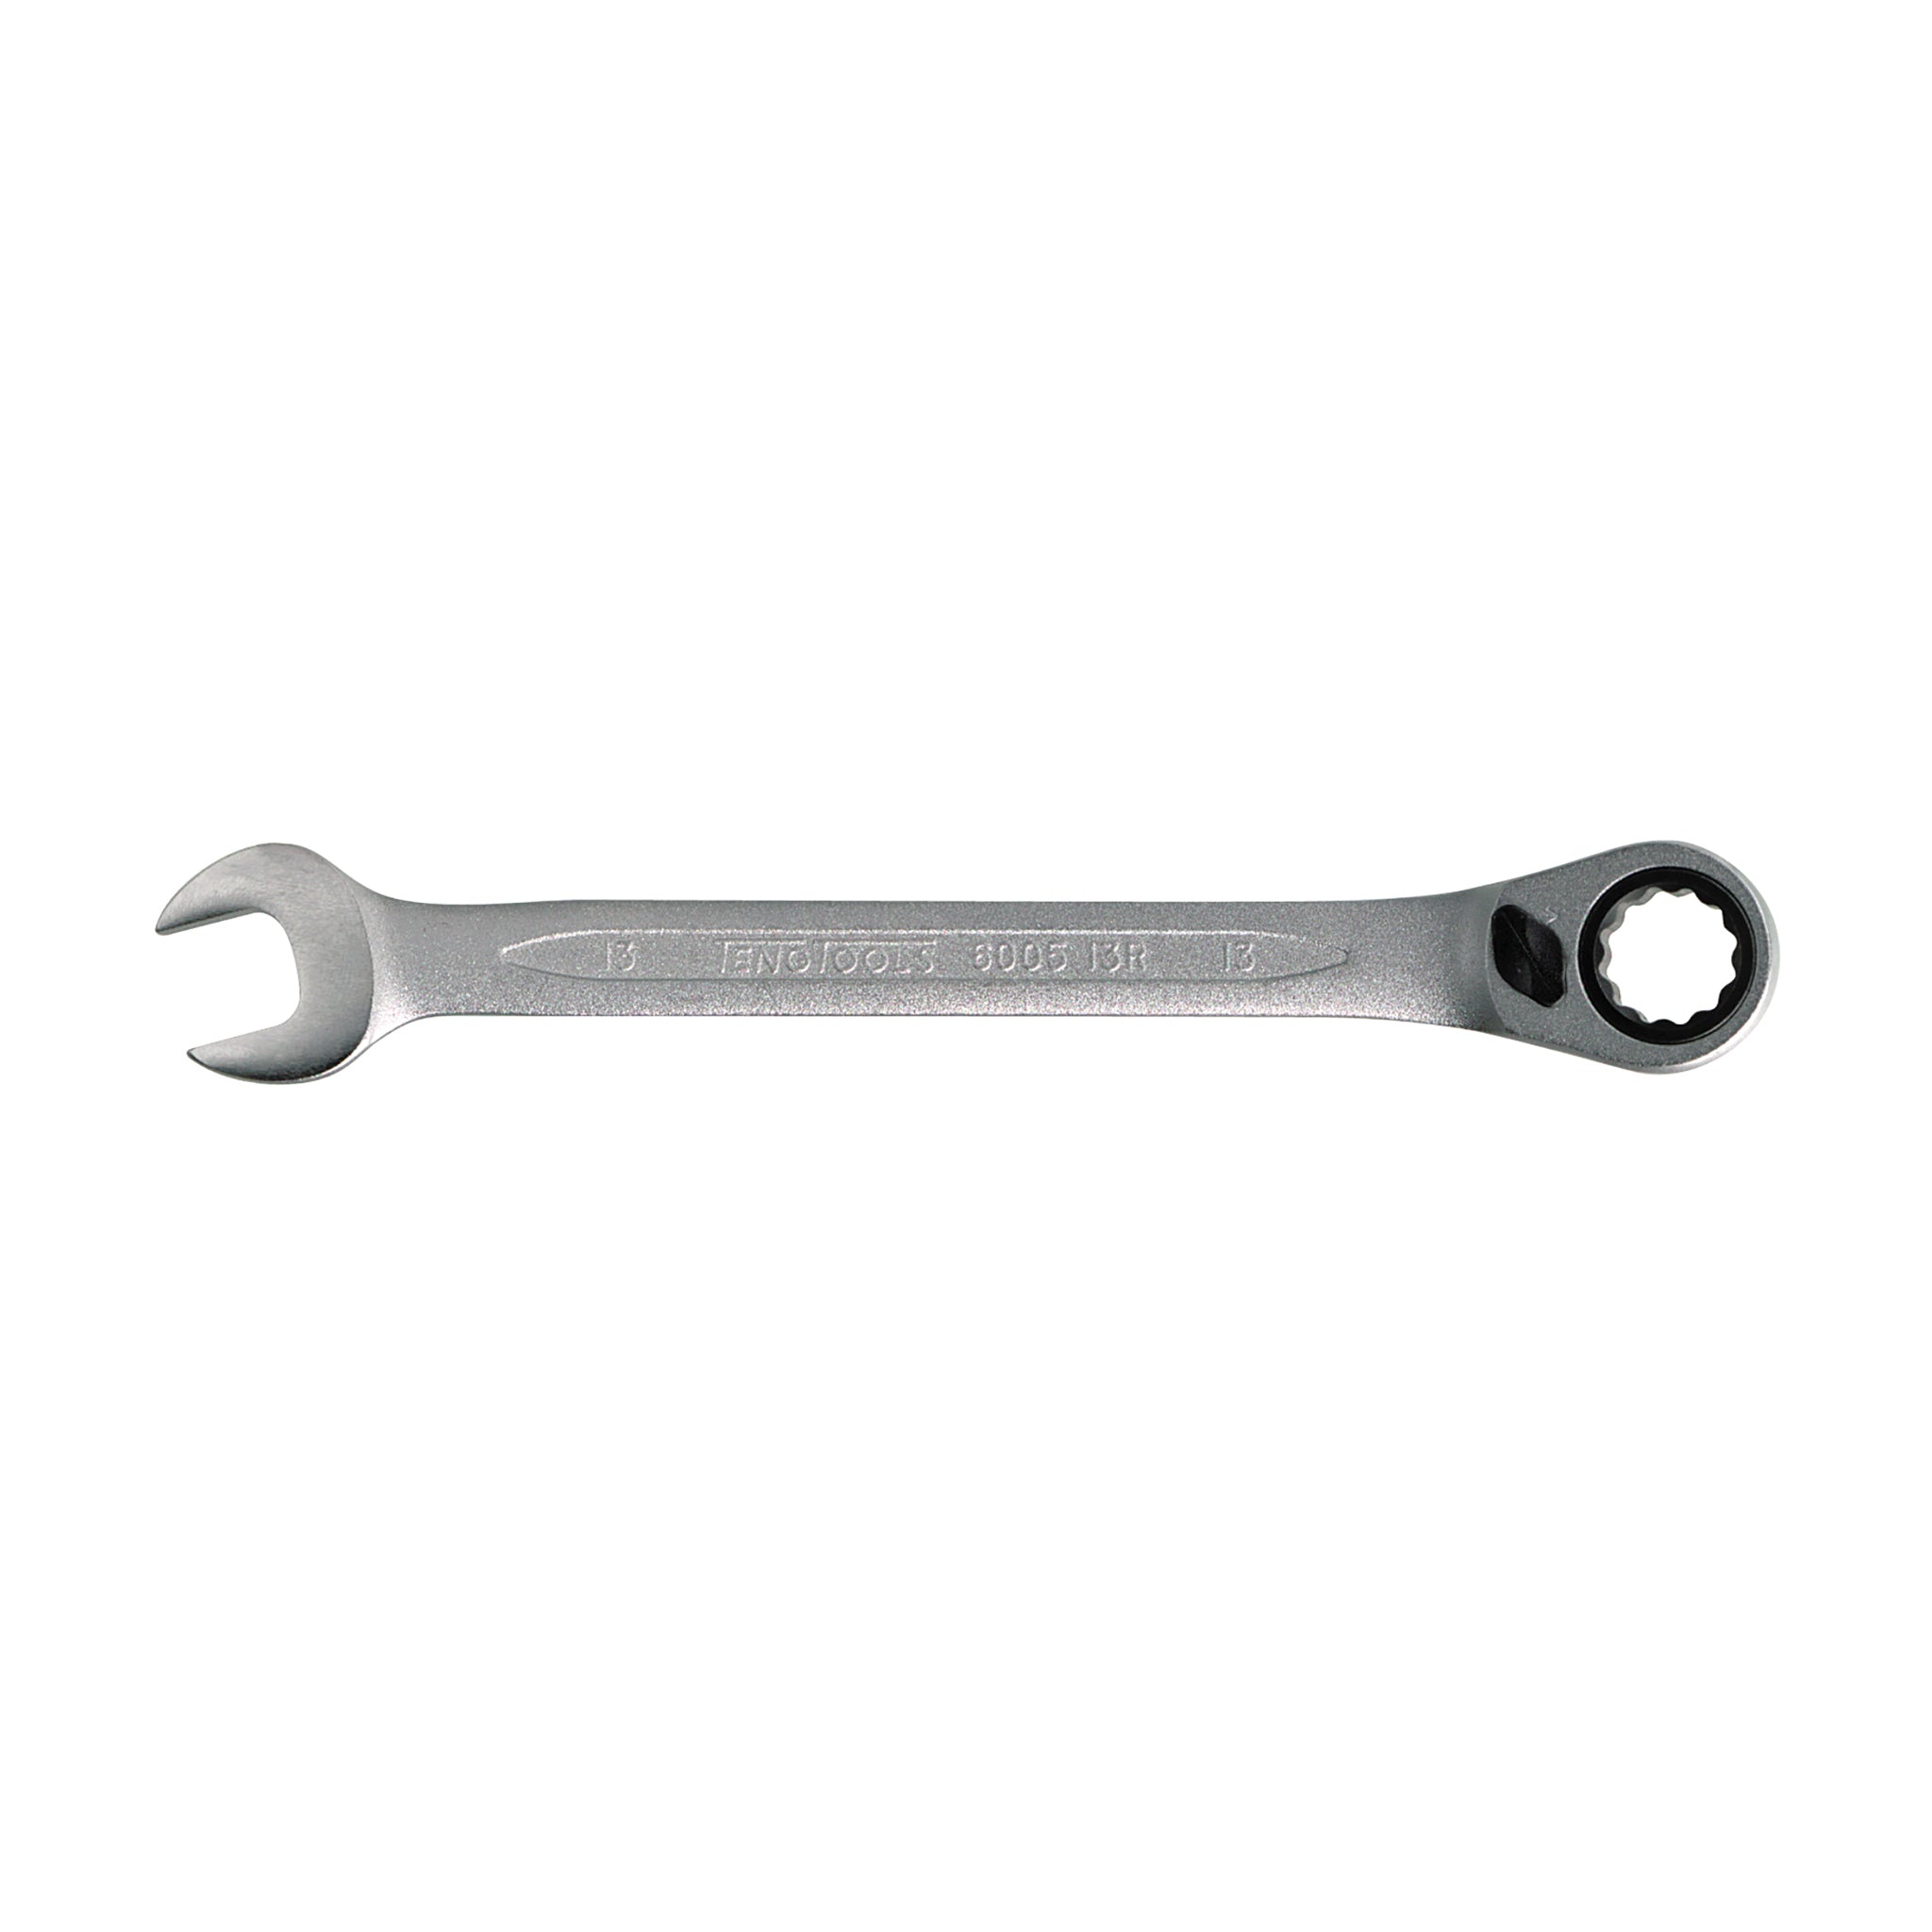 72 Teeth Ratchet Combination Metric Wrenches With Flip Reverse Lever - 9mm